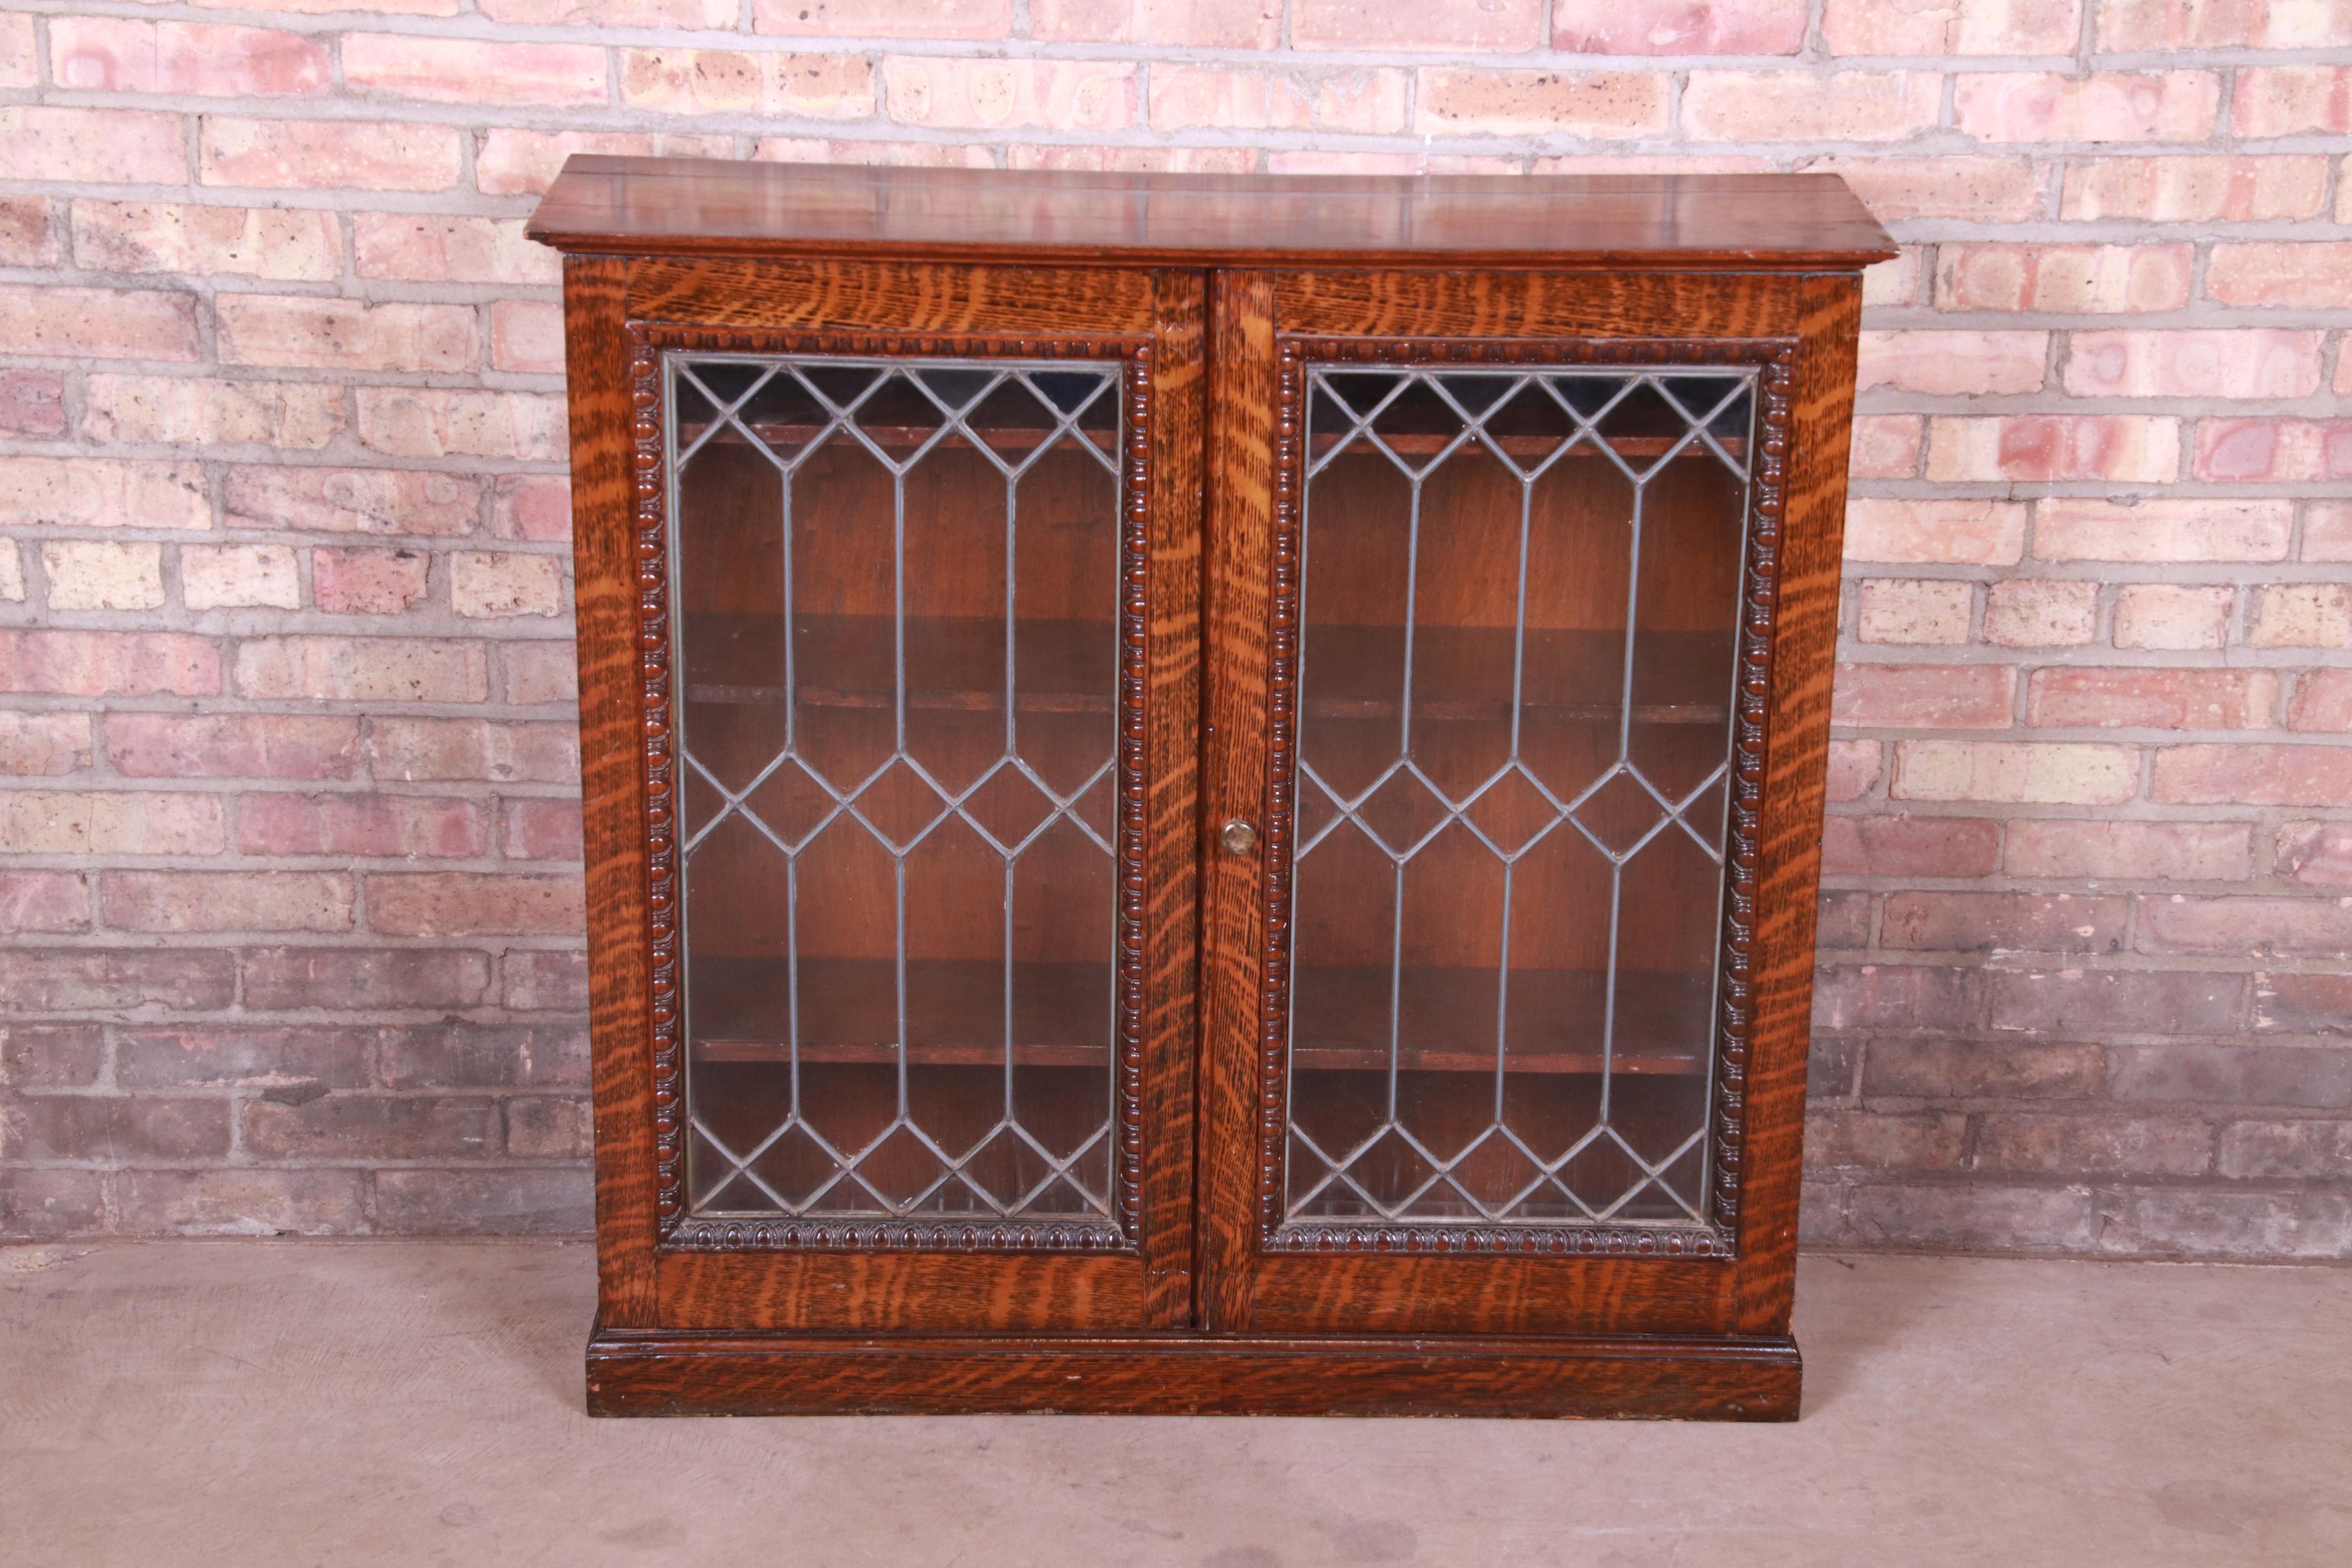 A gorgeous antique bookcase

USA, circa 1900

Tiger oak case, with leaded glass doors and brass hardware. Three interior shelves are adjustable.

Measures: 39.13